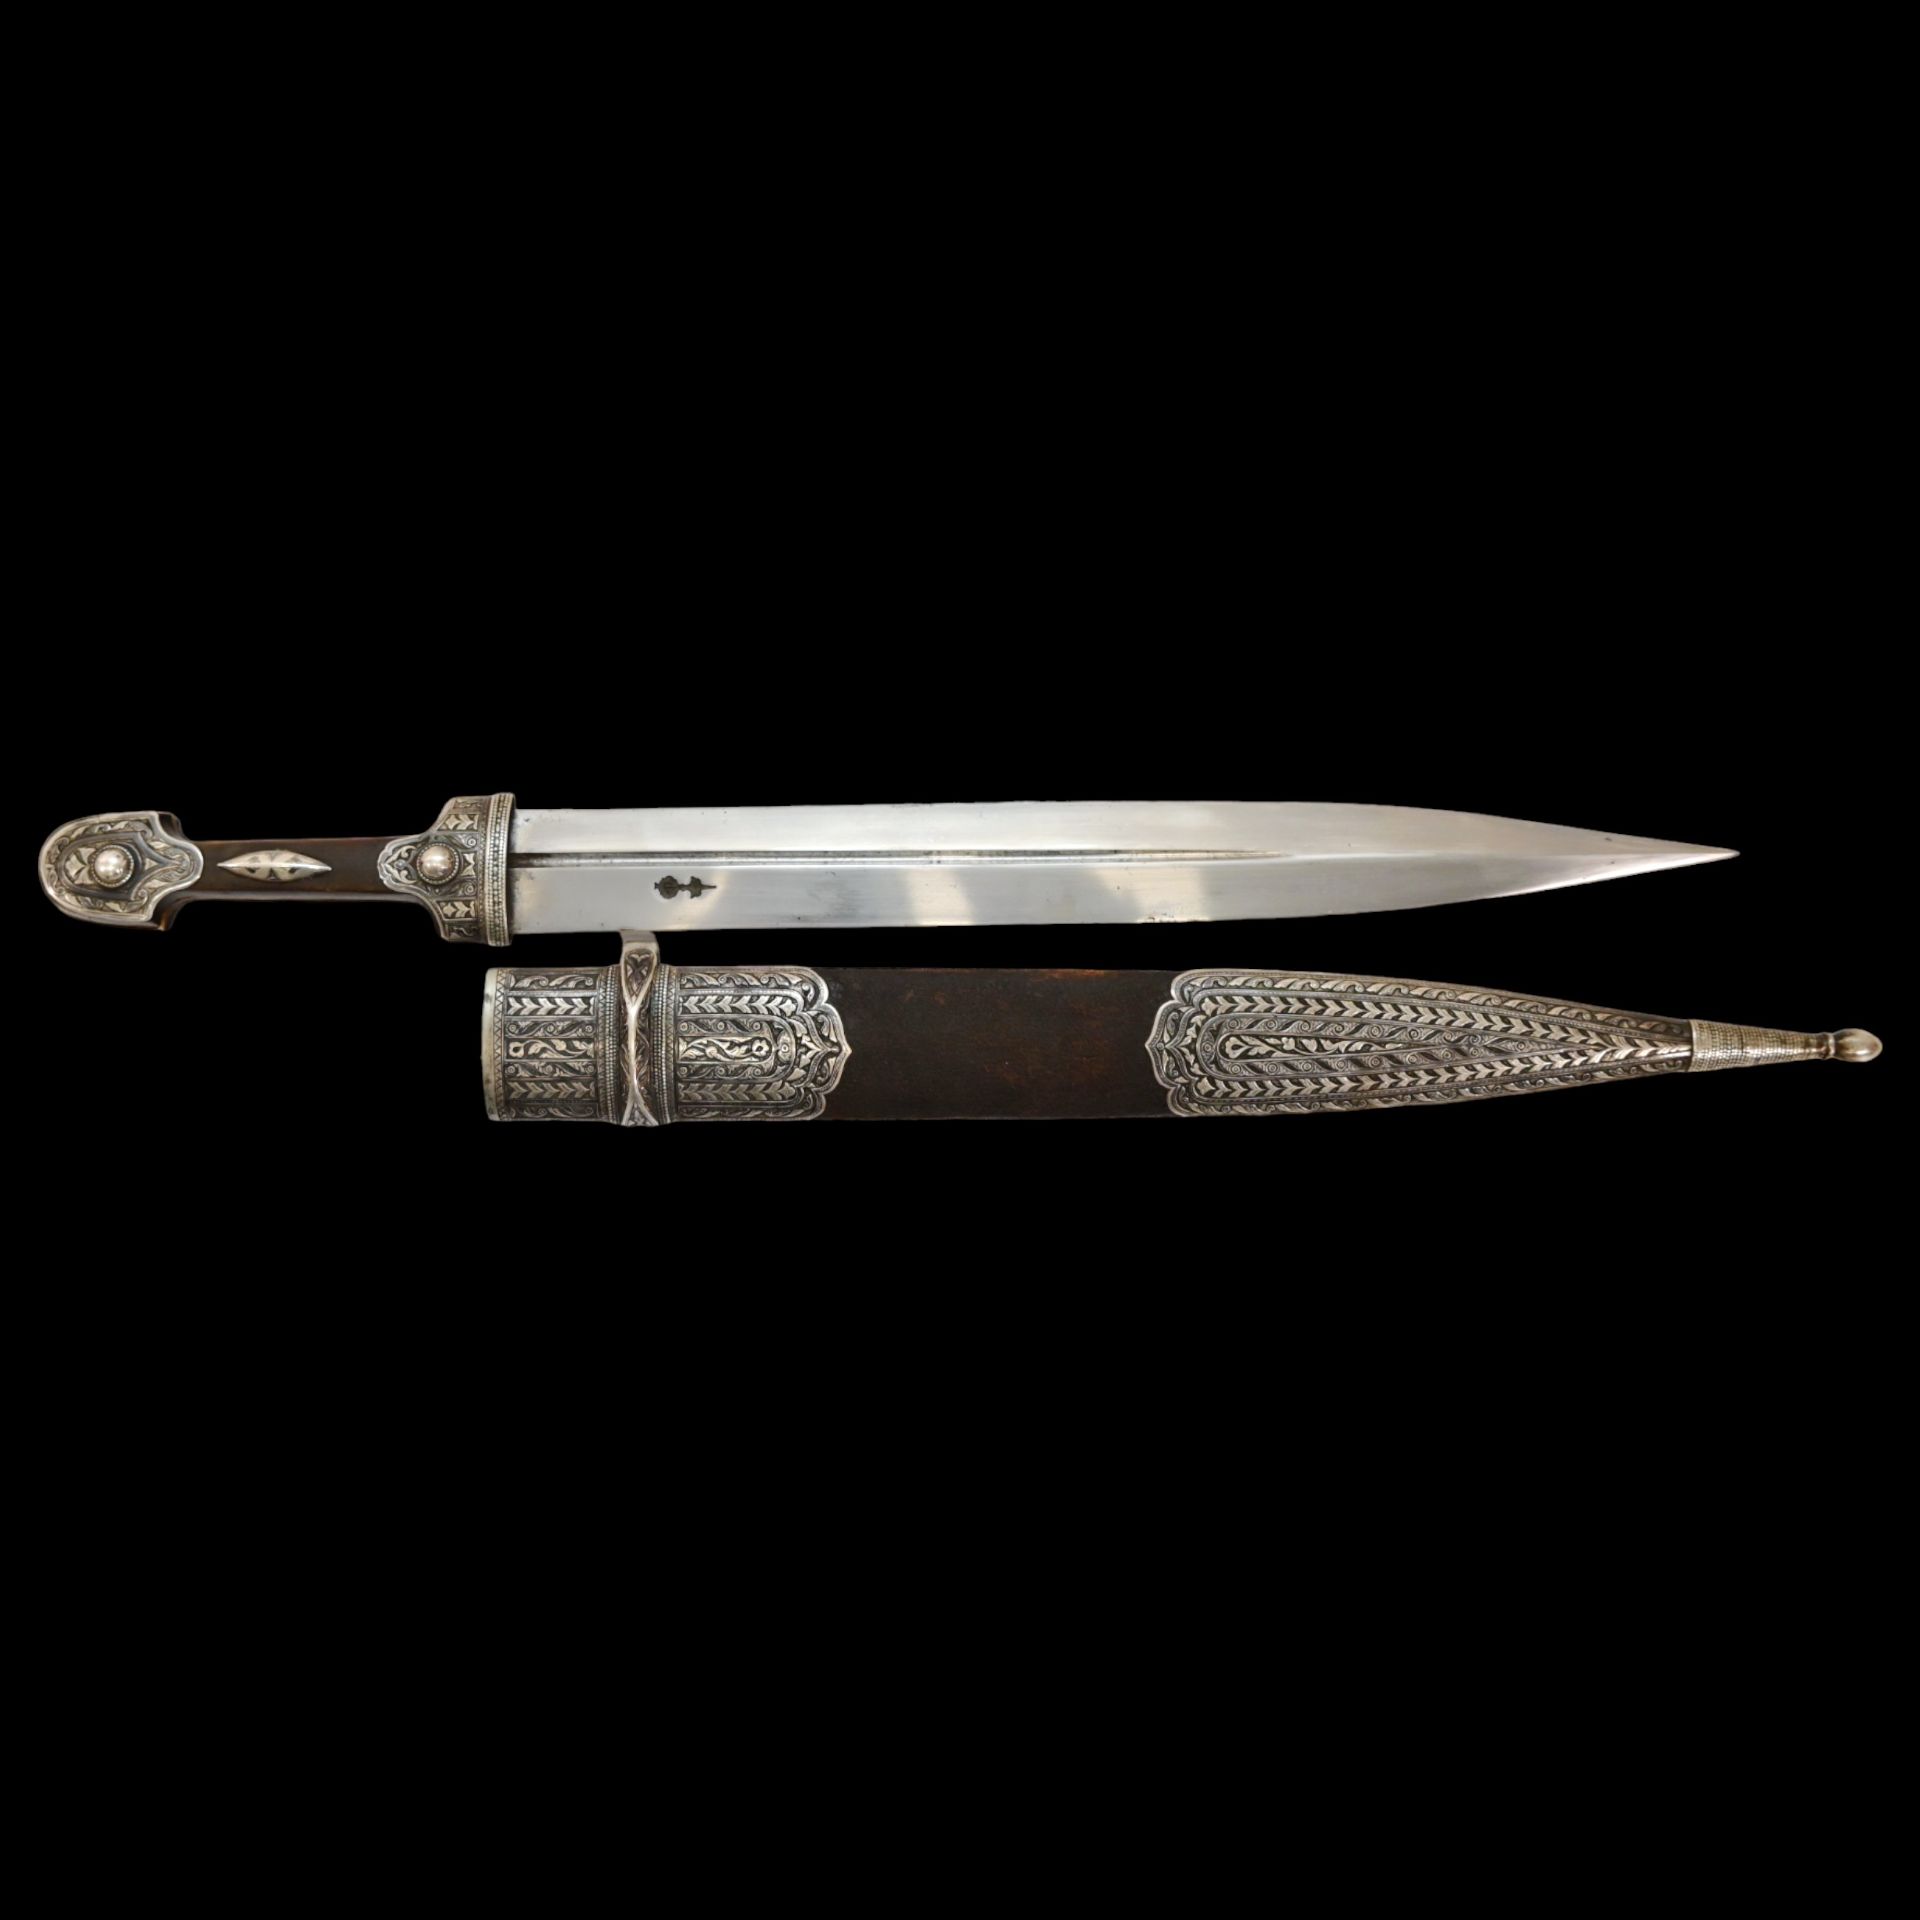 Caucasian Kama Dagger, silver, engraved, niello, His Imperial Majesty's Own Convoy, circa 1900. - Image 9 of 10